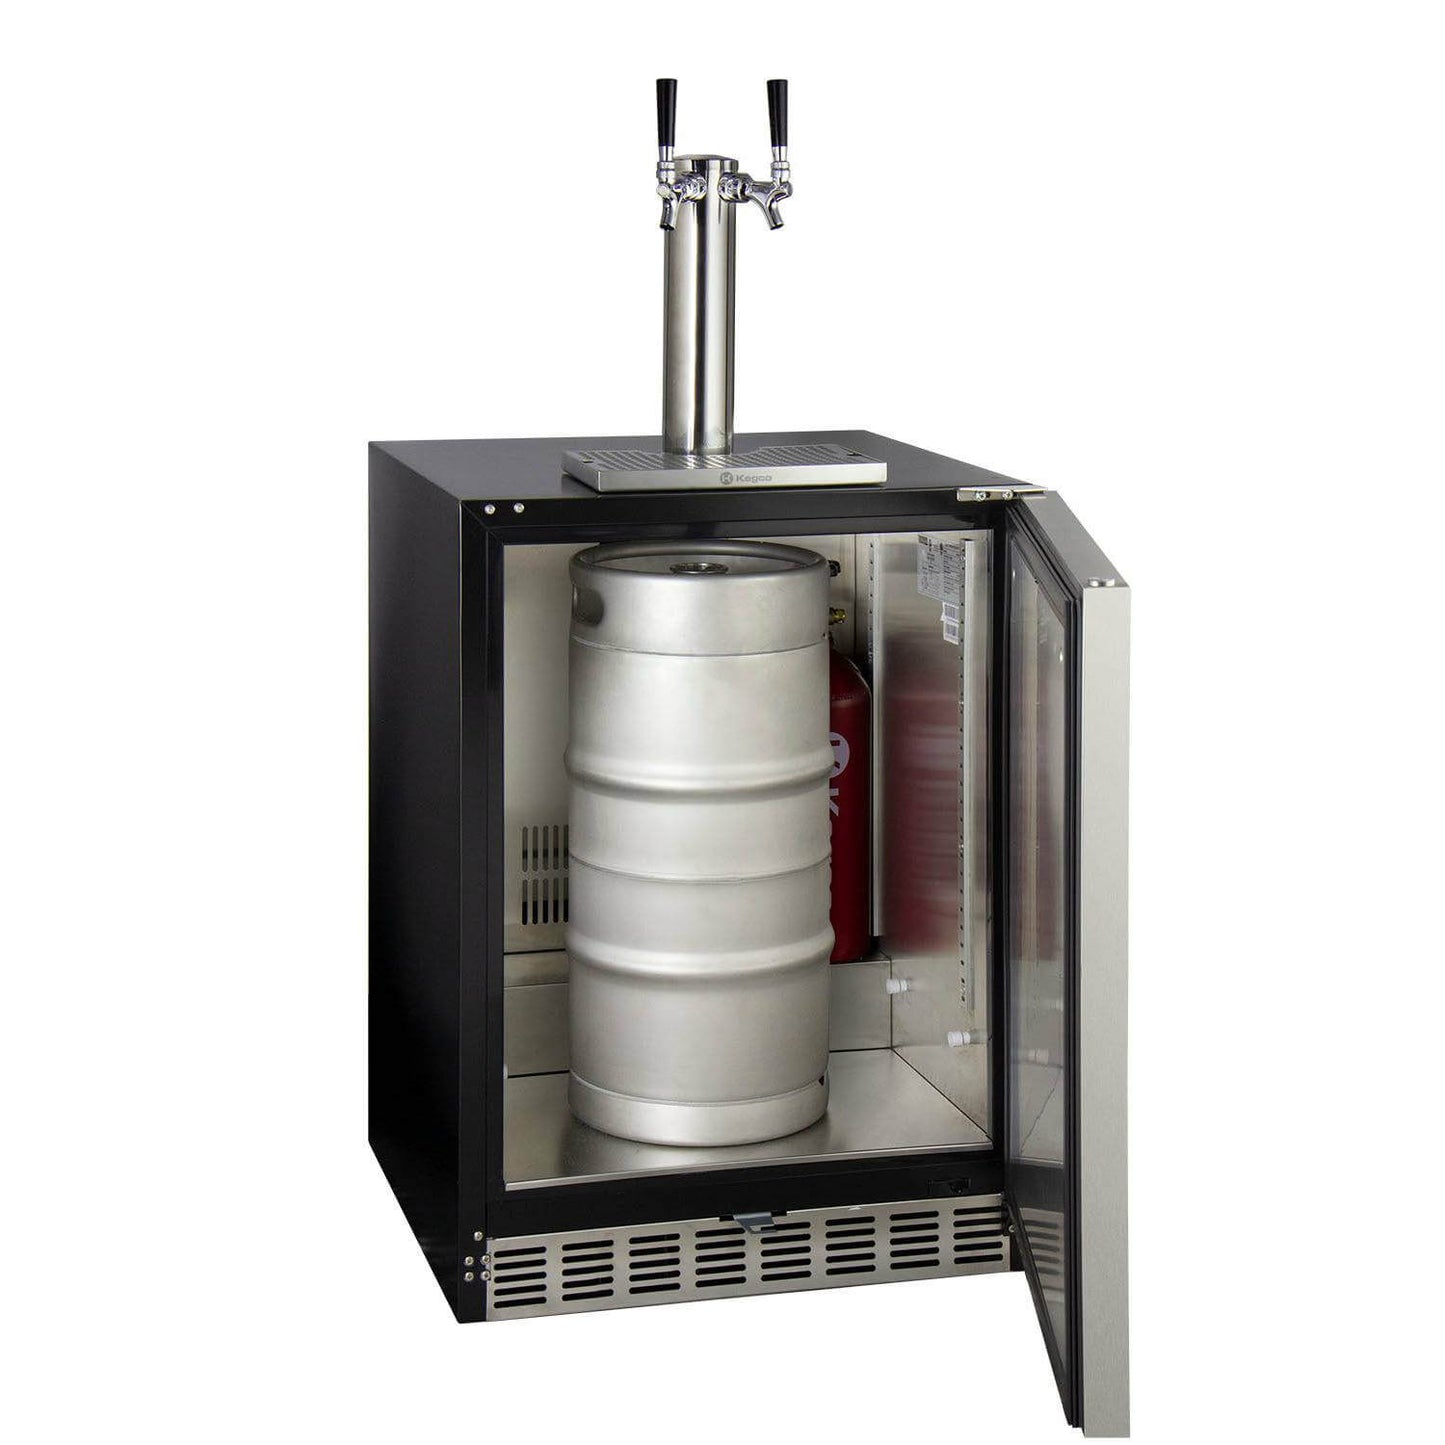 Kegco 24" Wide Dual Tap Stainless Steel Right Hinge Built-in ADA Kegerator with Kit